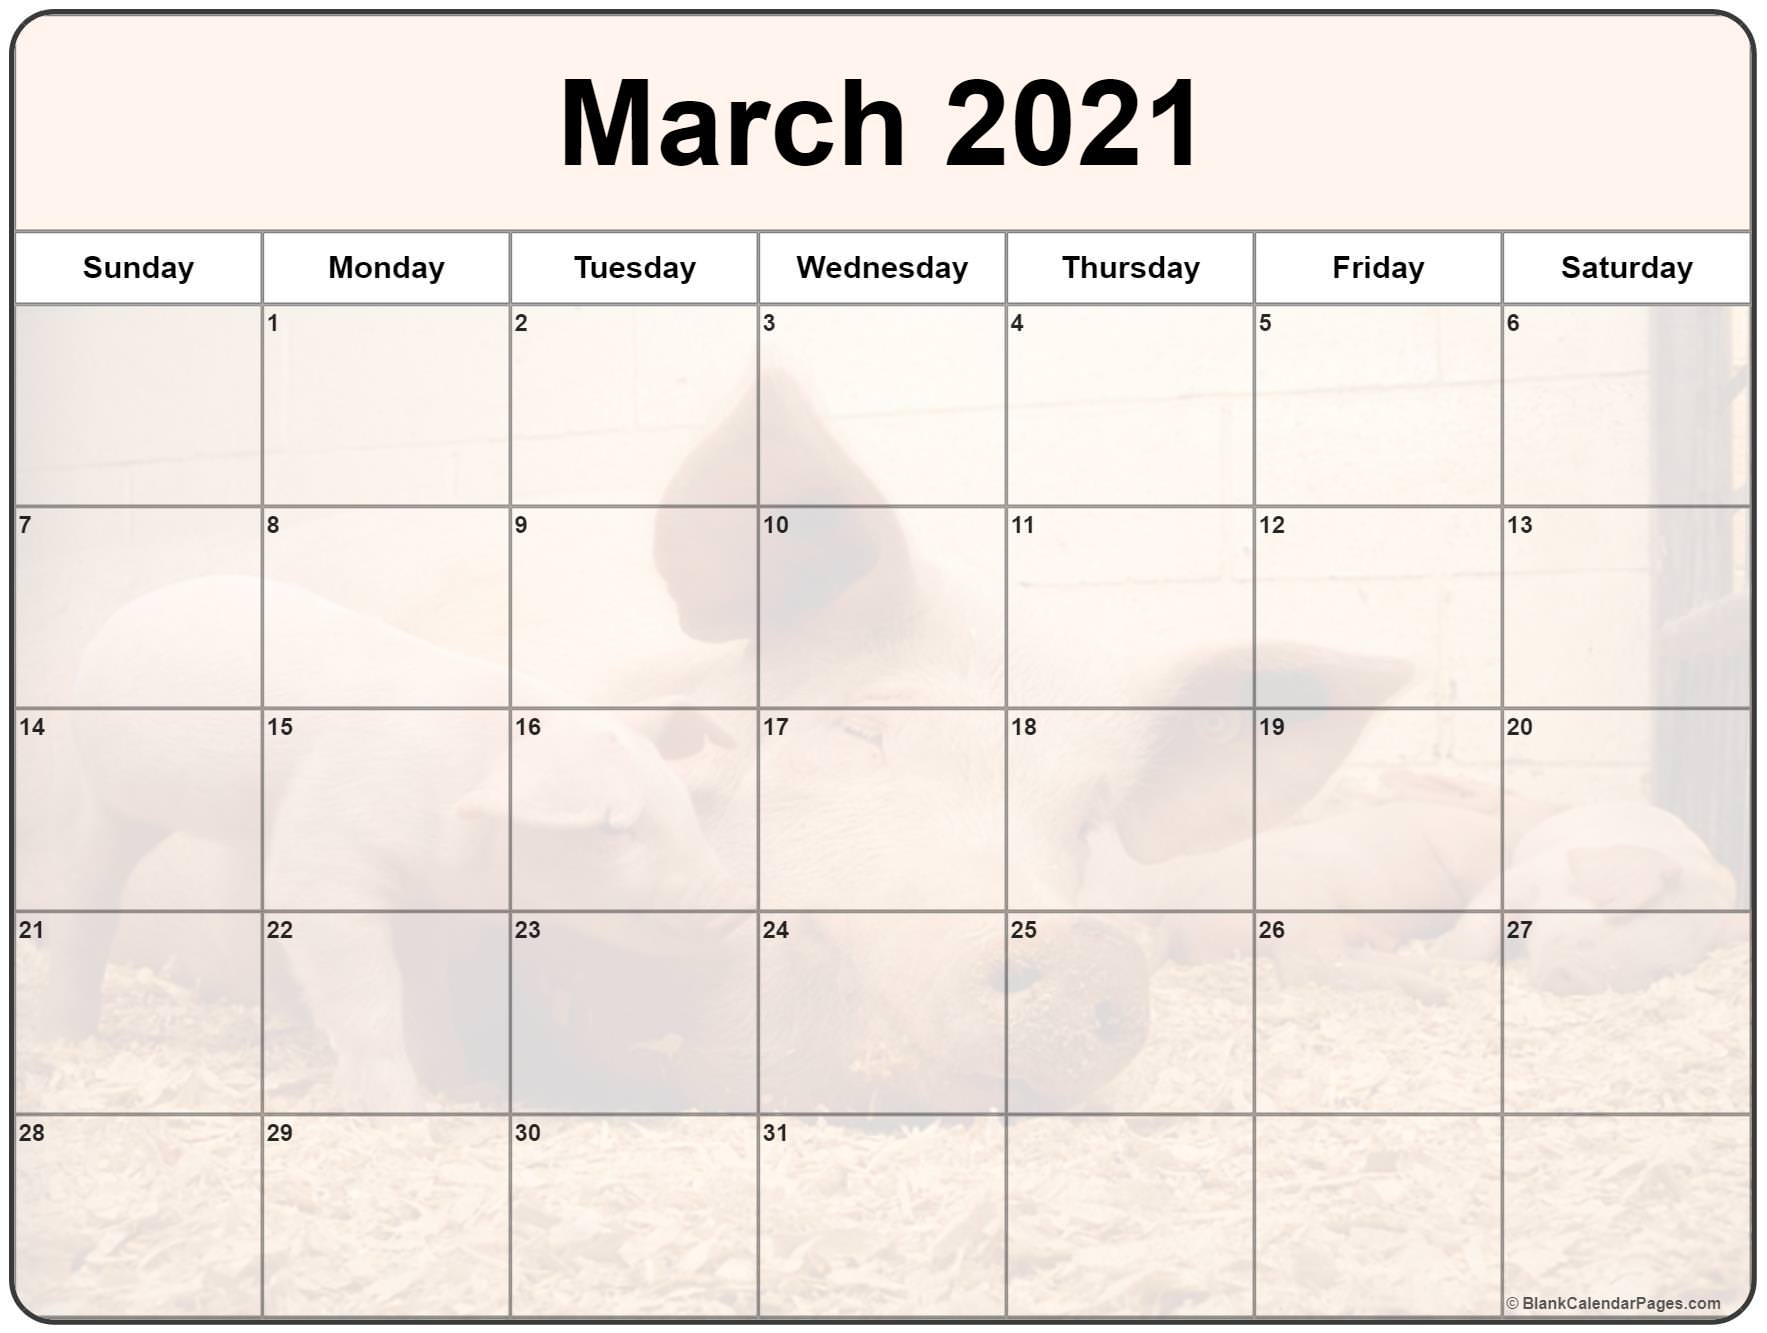 Collection of March 2021 photo calendars with image filters.